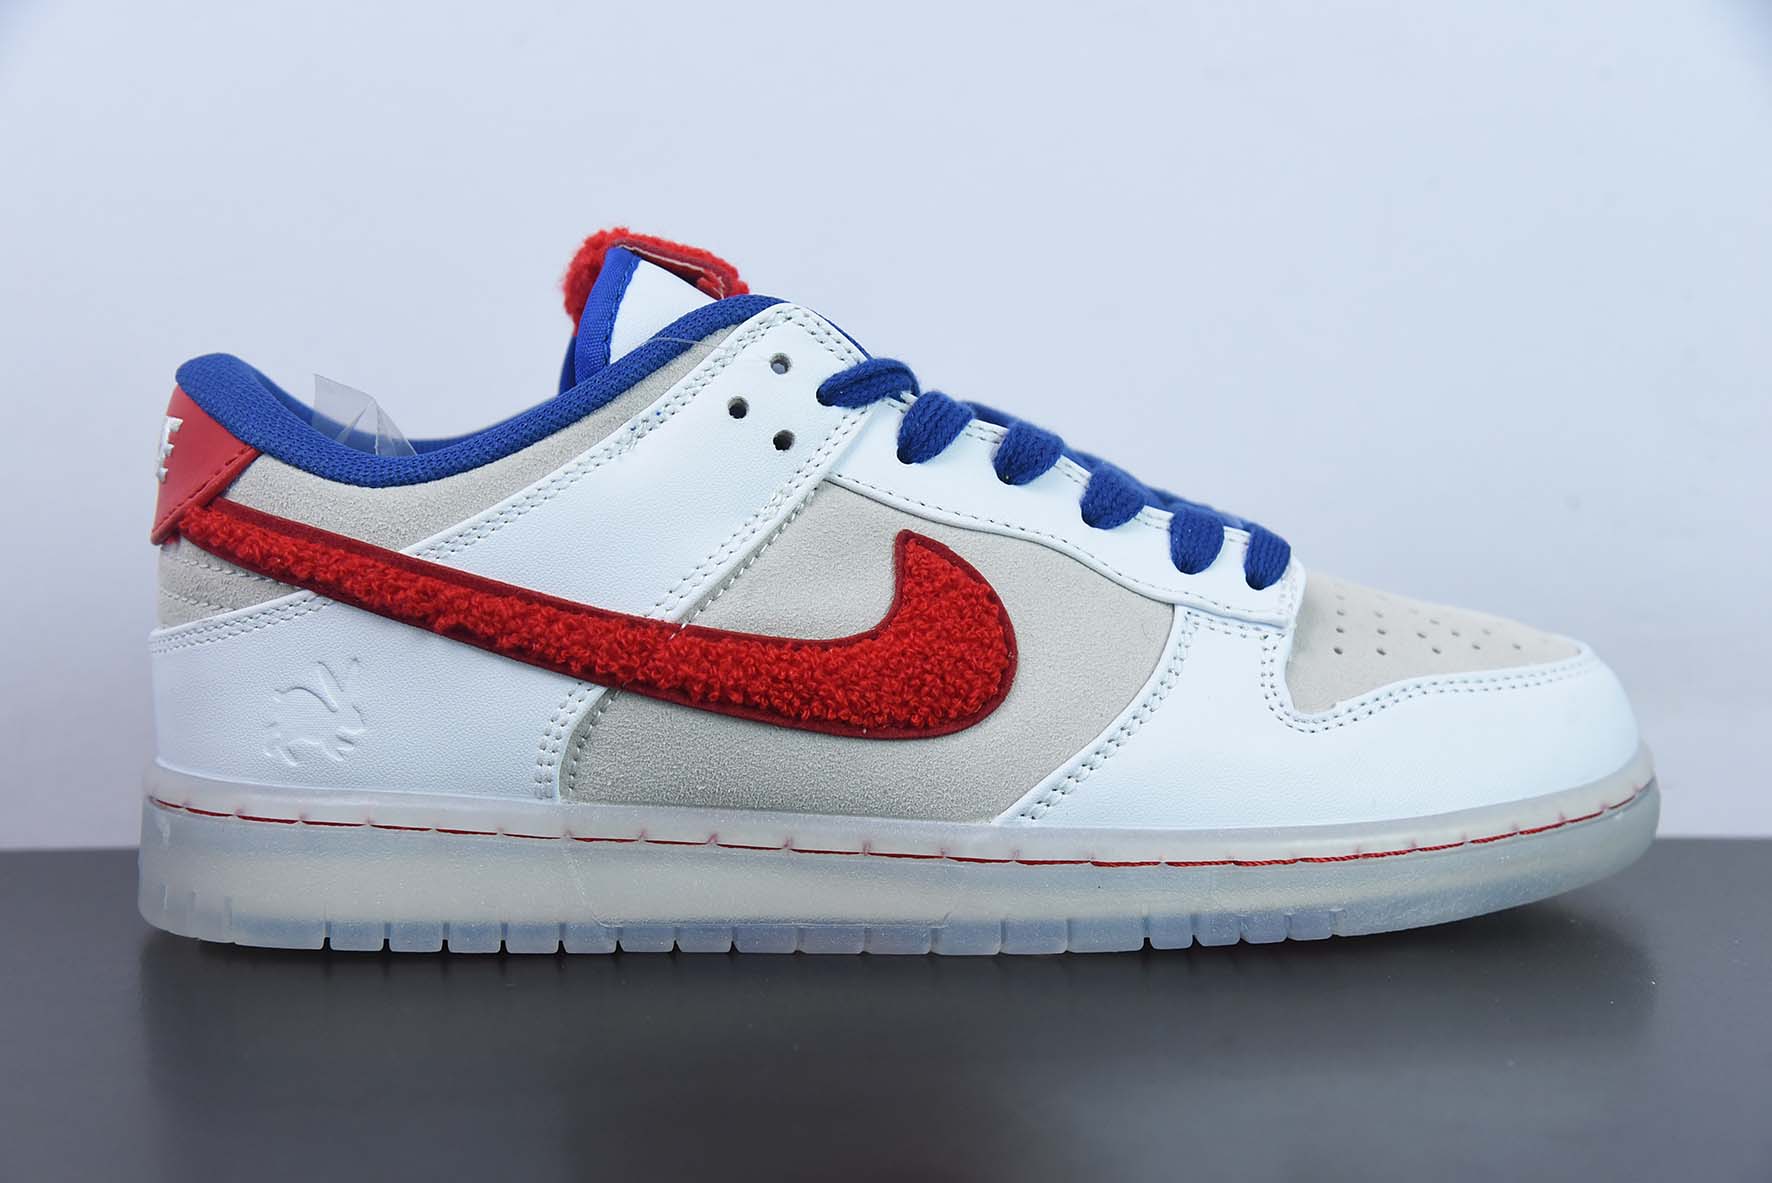 NIKE DUNK LOW – “YEAR OF THE RABBIT”